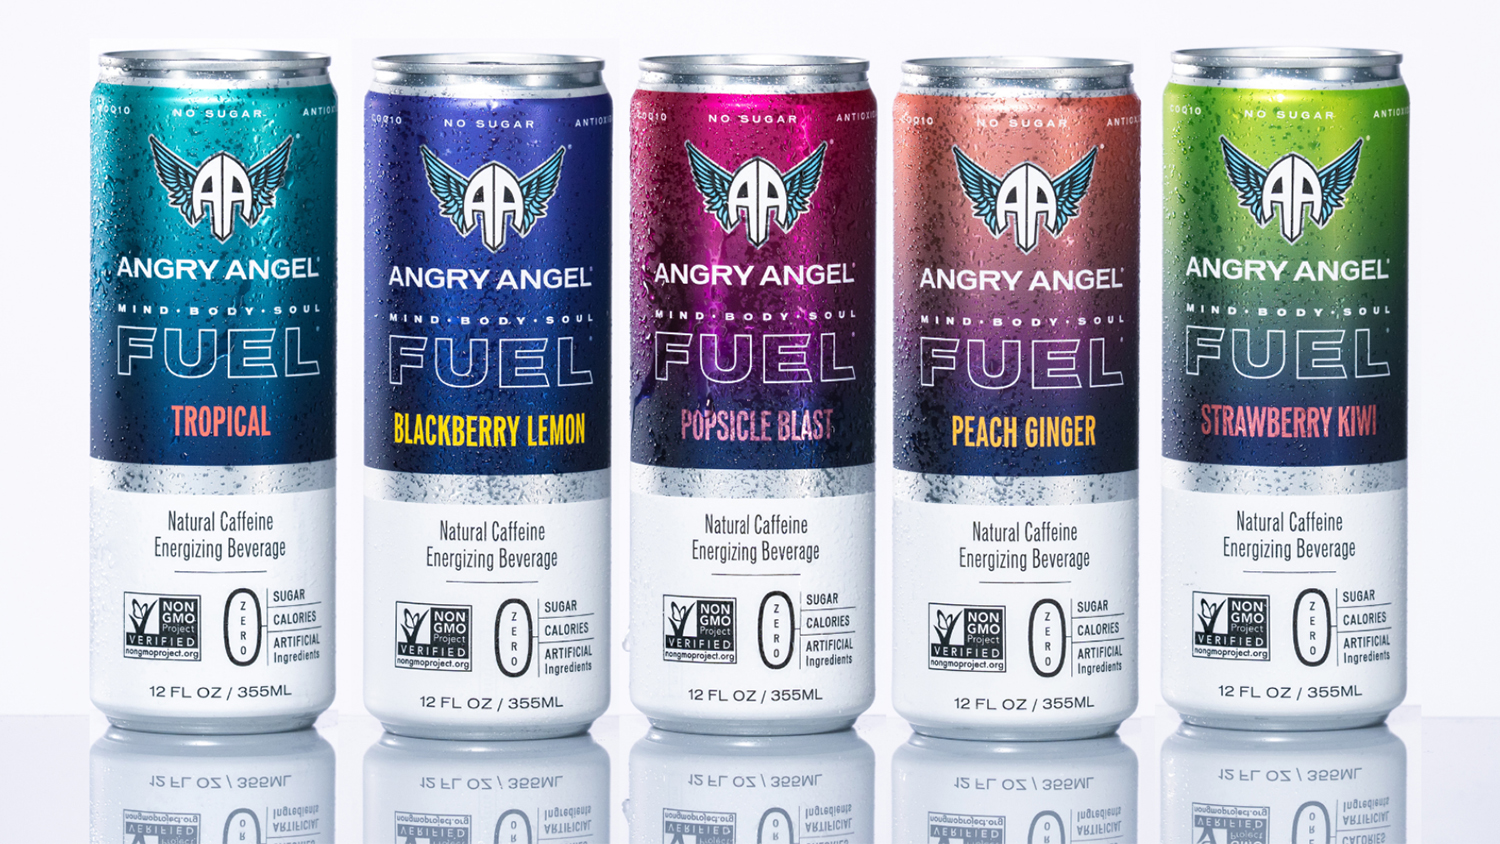 Five beverage cans lined up in a row showing the different colors (aqua, blue, red, orange and green), labels and flavors for Angry Angel energy drinks.